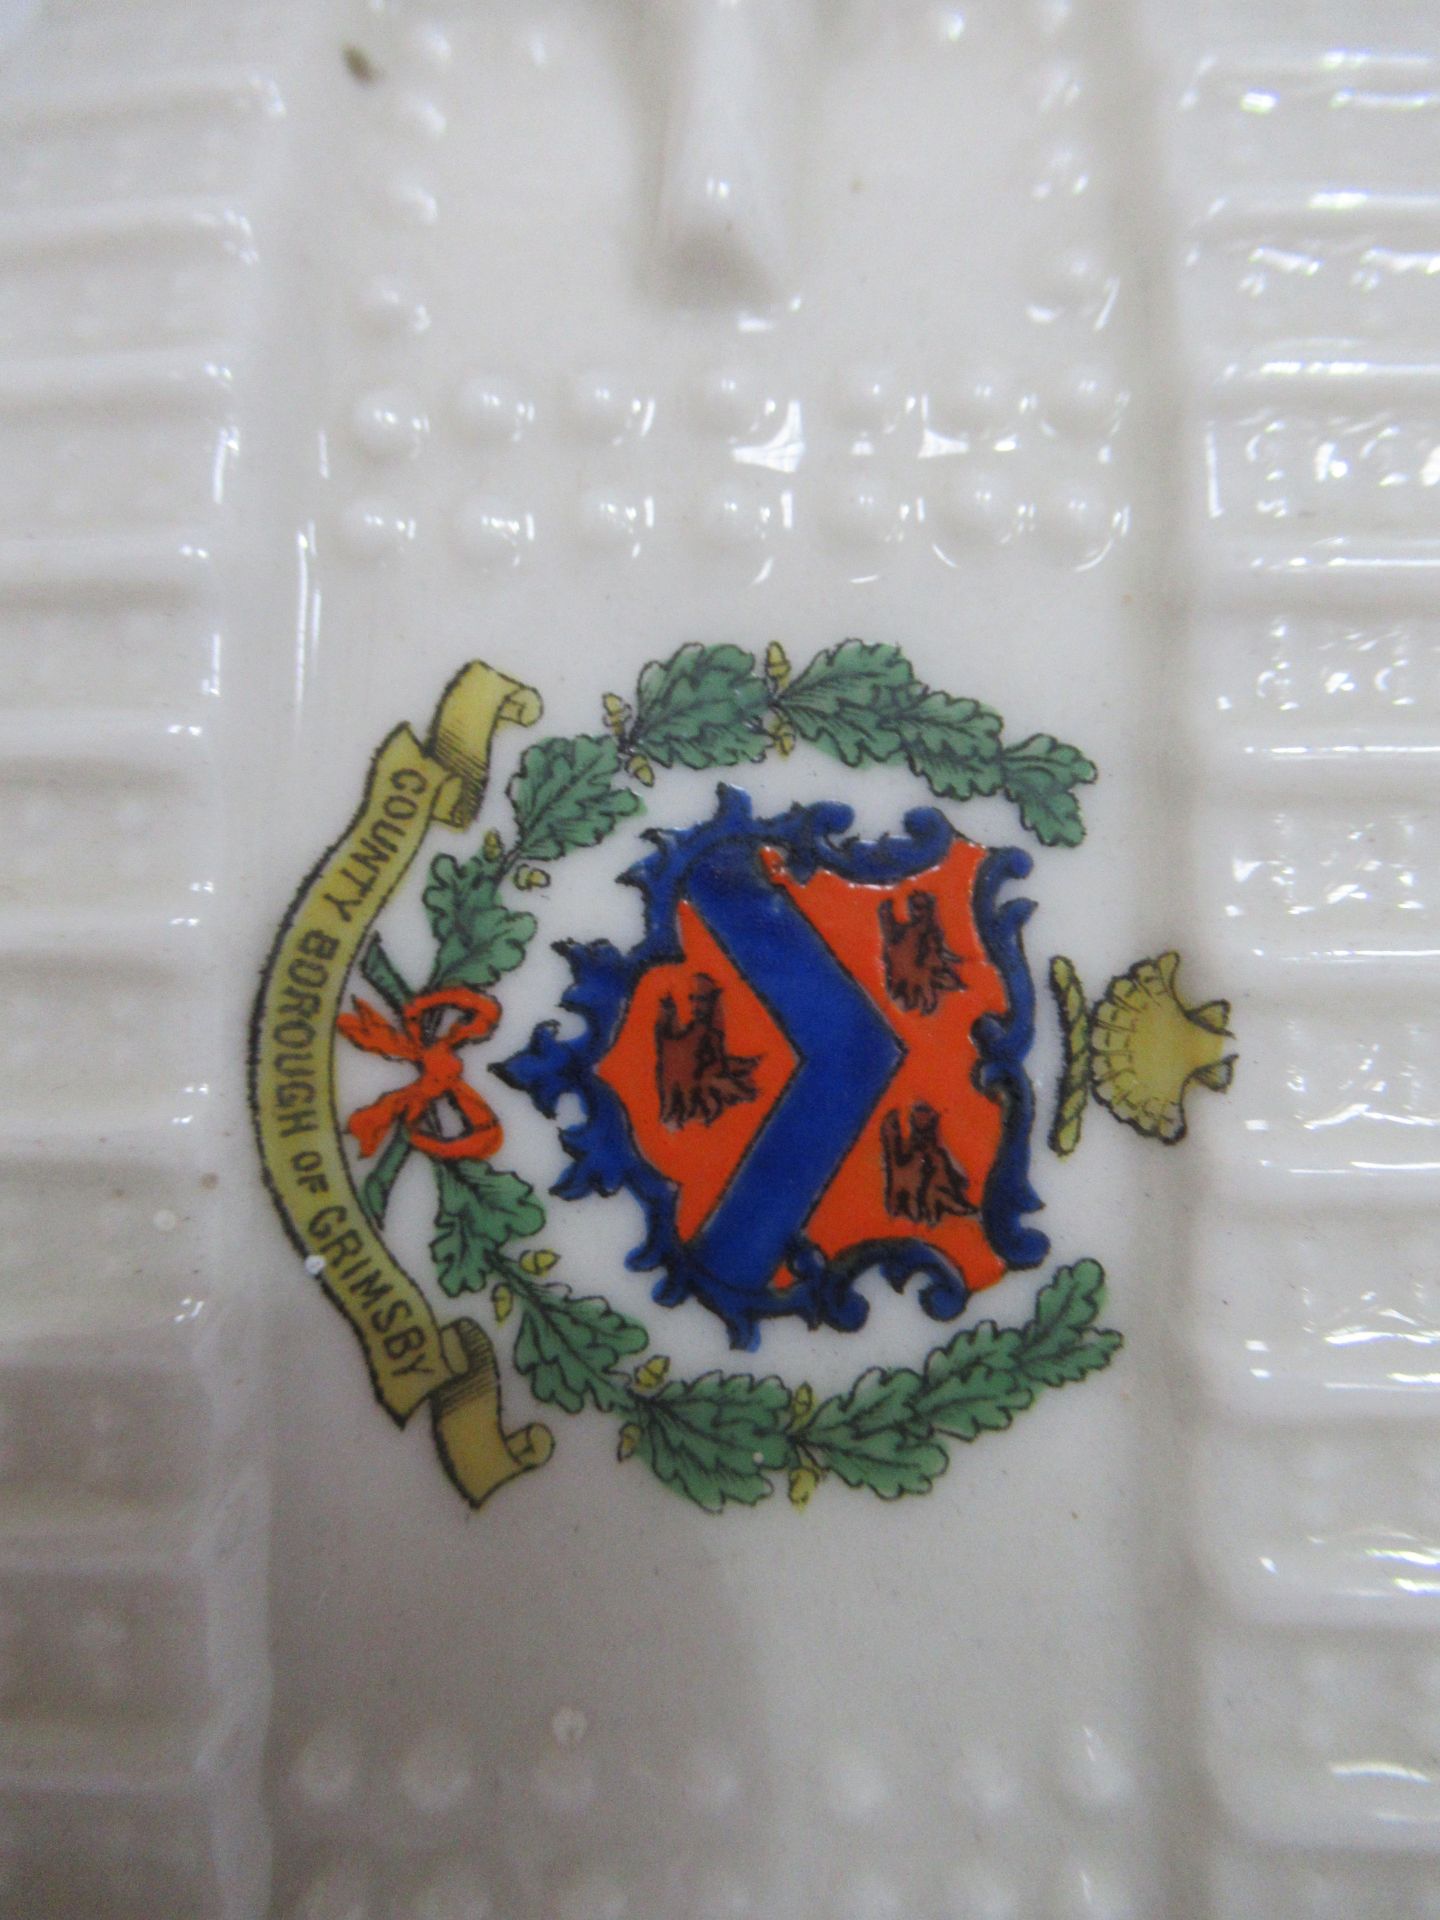 Crested China Arcadian model of tank with Grimsby coat of arms (90mm x 115mm) - Image 6 of 18